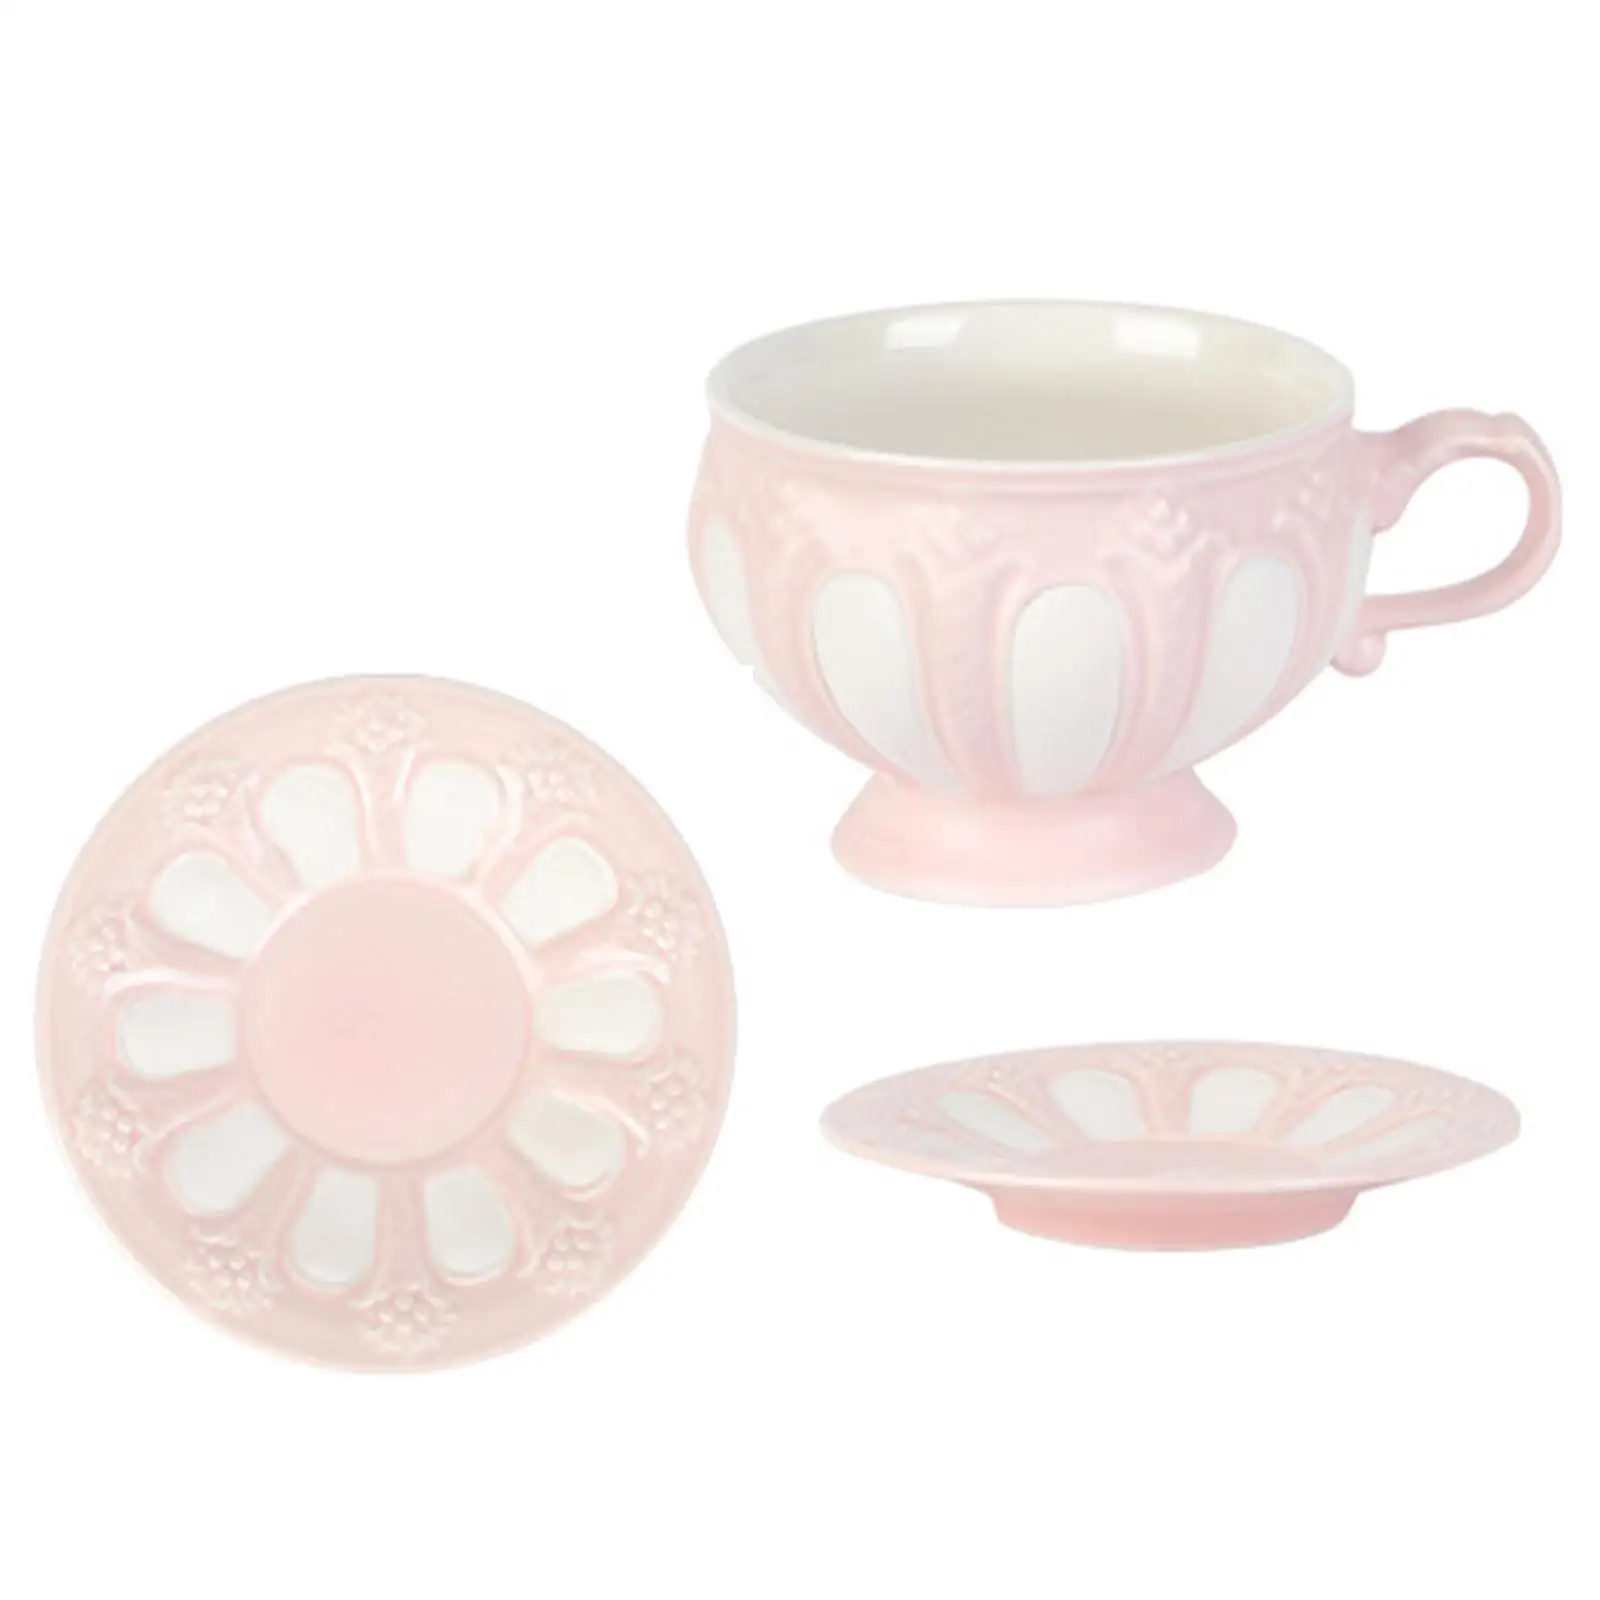 Ceramic Coffee Porcelain Tea Cups Creative Afternoon Tea Set Coffee and Saucer for Hot Chocolate Latte